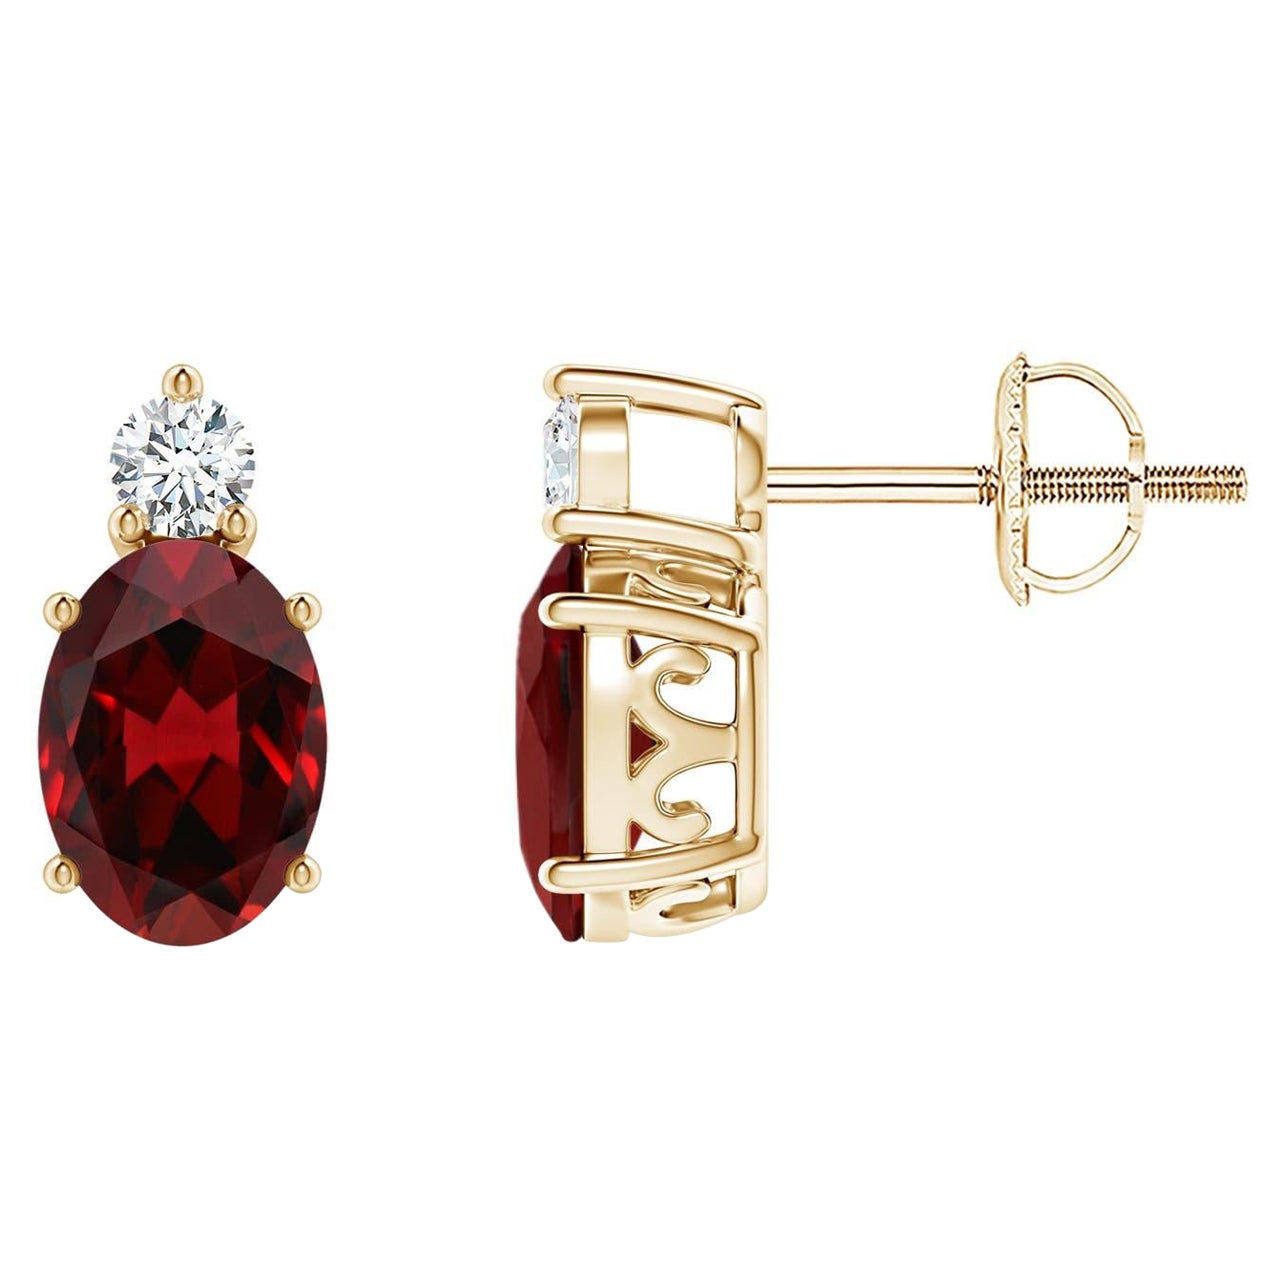 Natural Oval 1.8ct Garnet Stud Earrings w/ Diamond 14K Yellow Gold (Size-7x5mm) For Sale